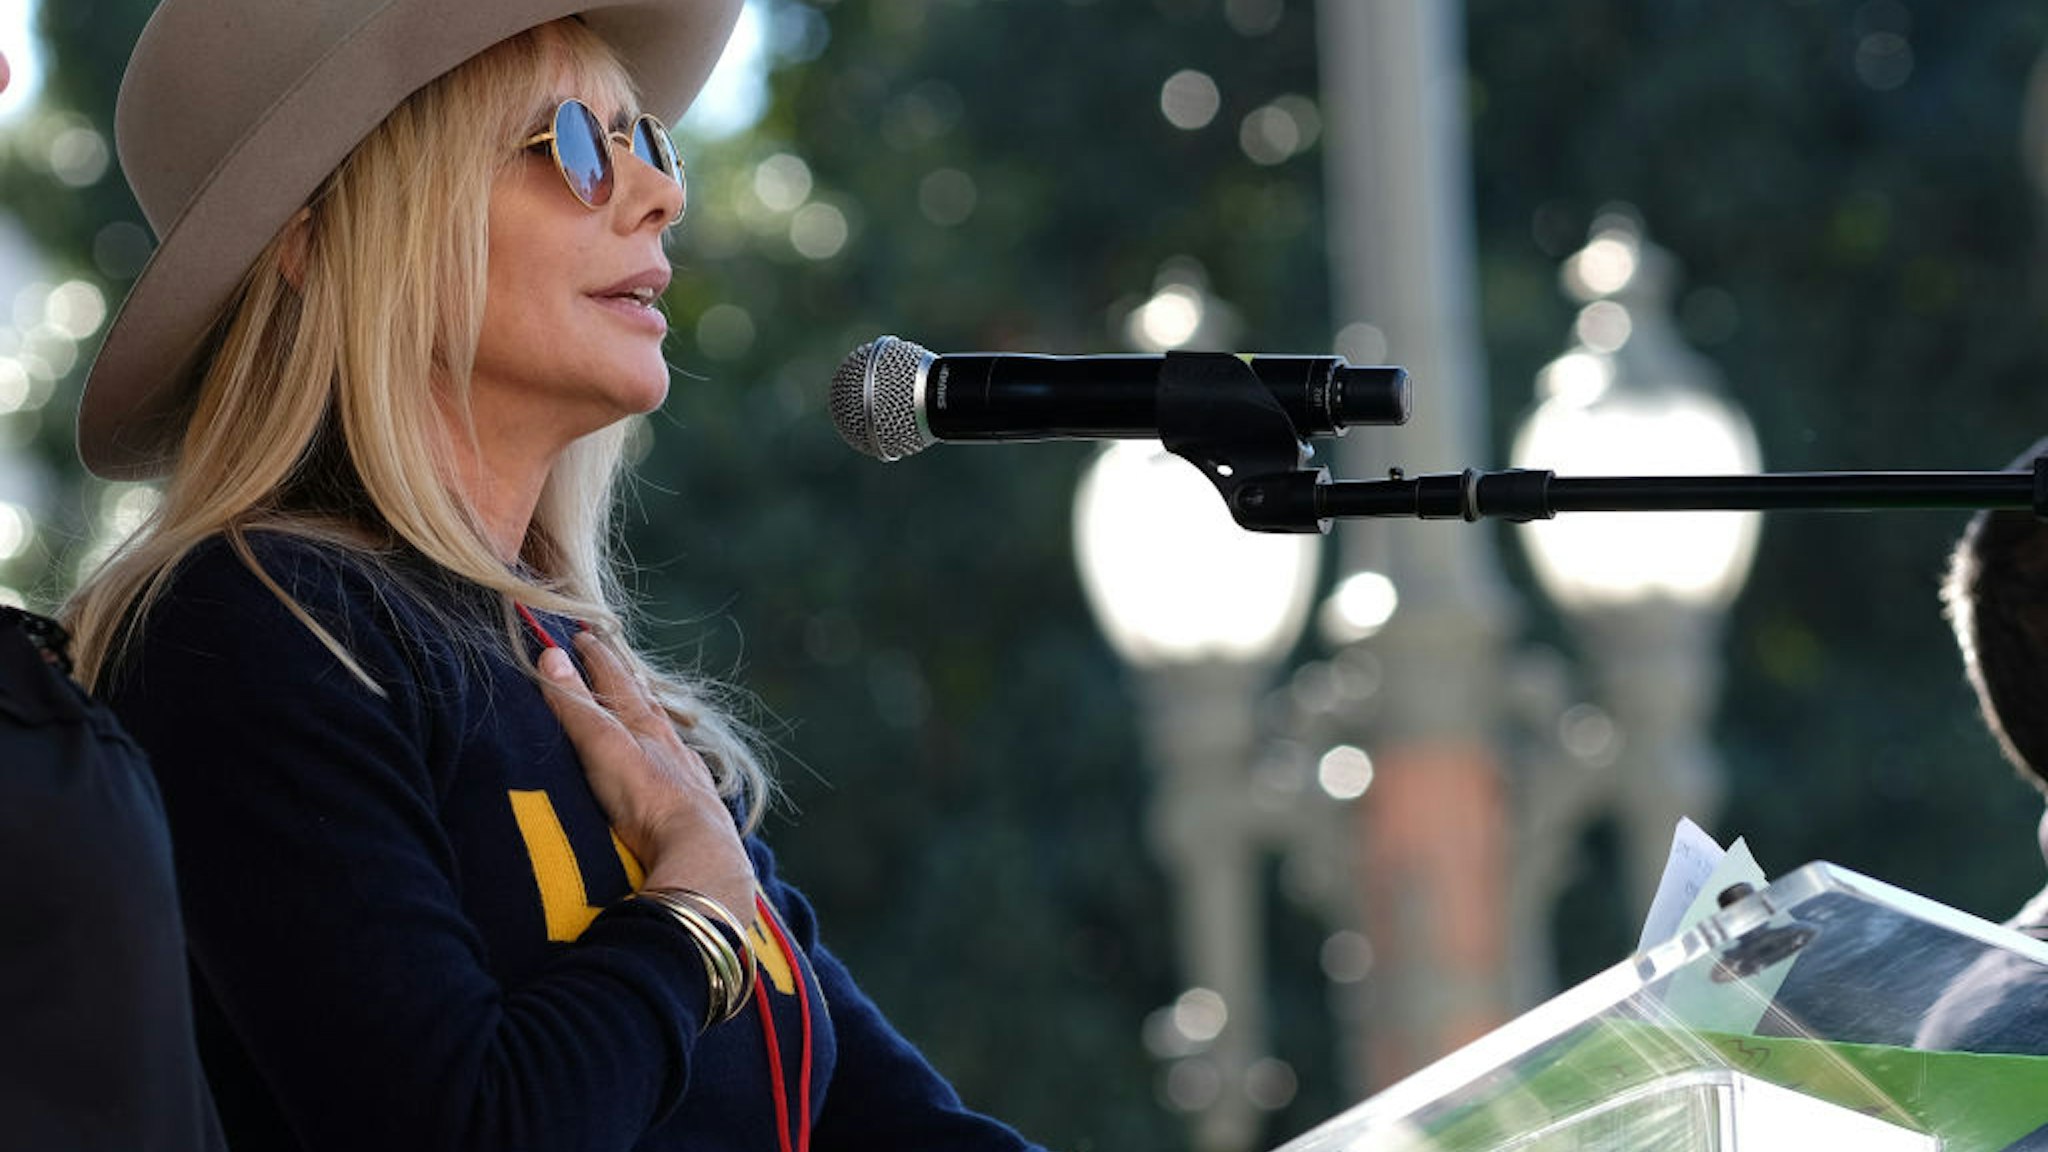 LOS ANGELES, CALIFORNIA - JANUARY 19: Actress Rosanna Arquette speaks at the Women's March California 2019 on January 19, 2019 in Los Angeles, California. Demonstrations are slated to take place in cities across the country in the third annual event aimed to highlight social change and celebrate women's rights around the world.